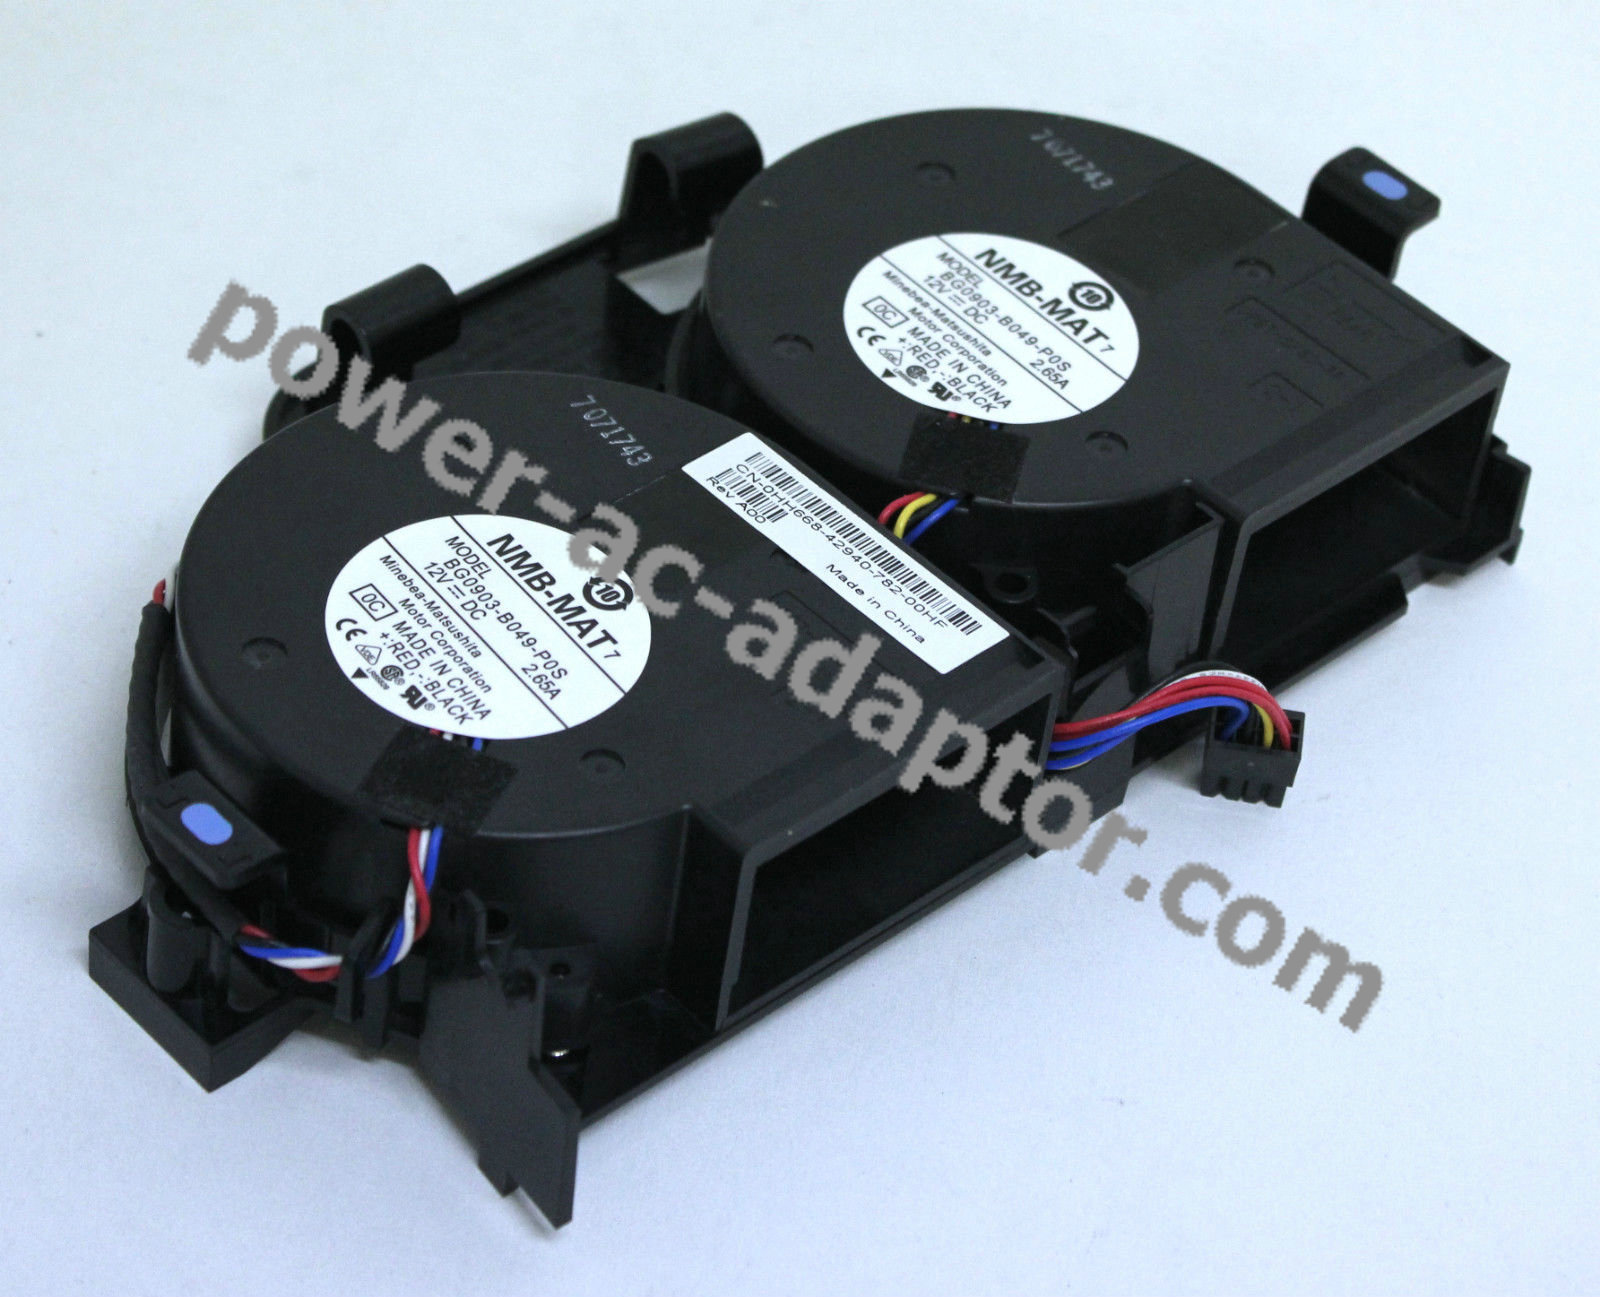 Dell PowerEdge 860 R200 Server PC fan BFB1012EH HH668 KH302